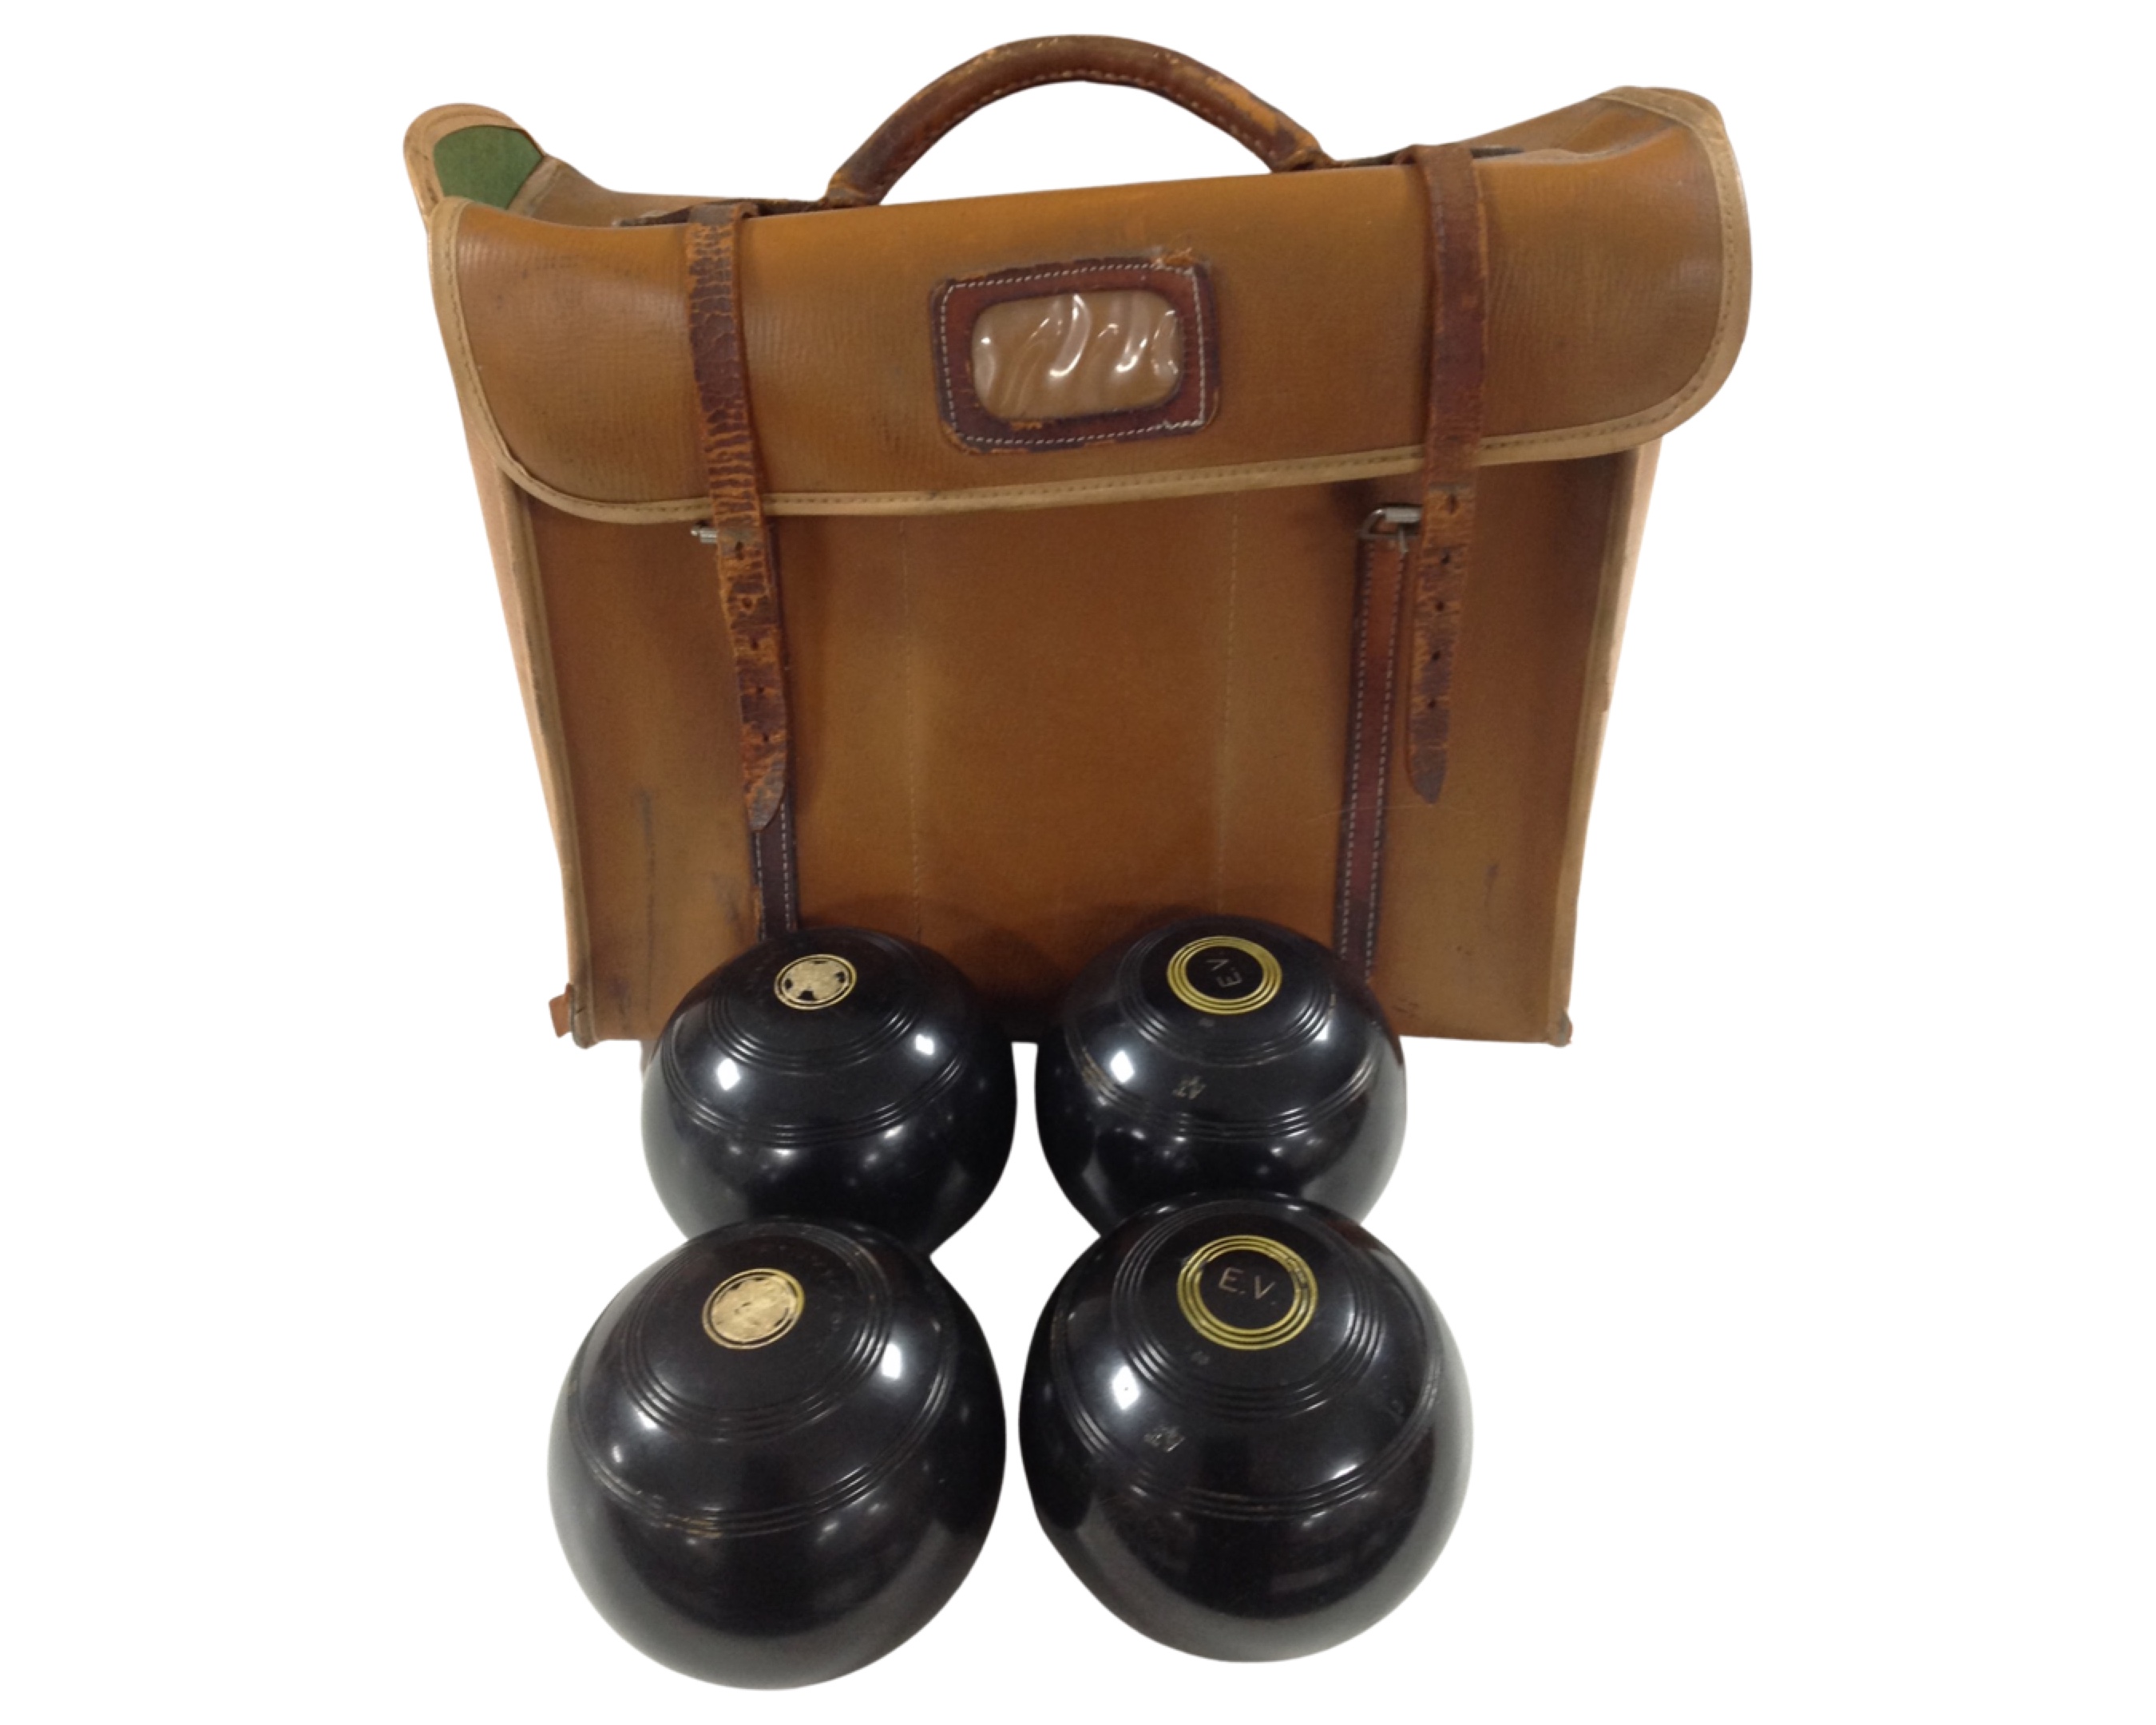 A lawn bowls bag containing a set of four Rinkmaster bowls.